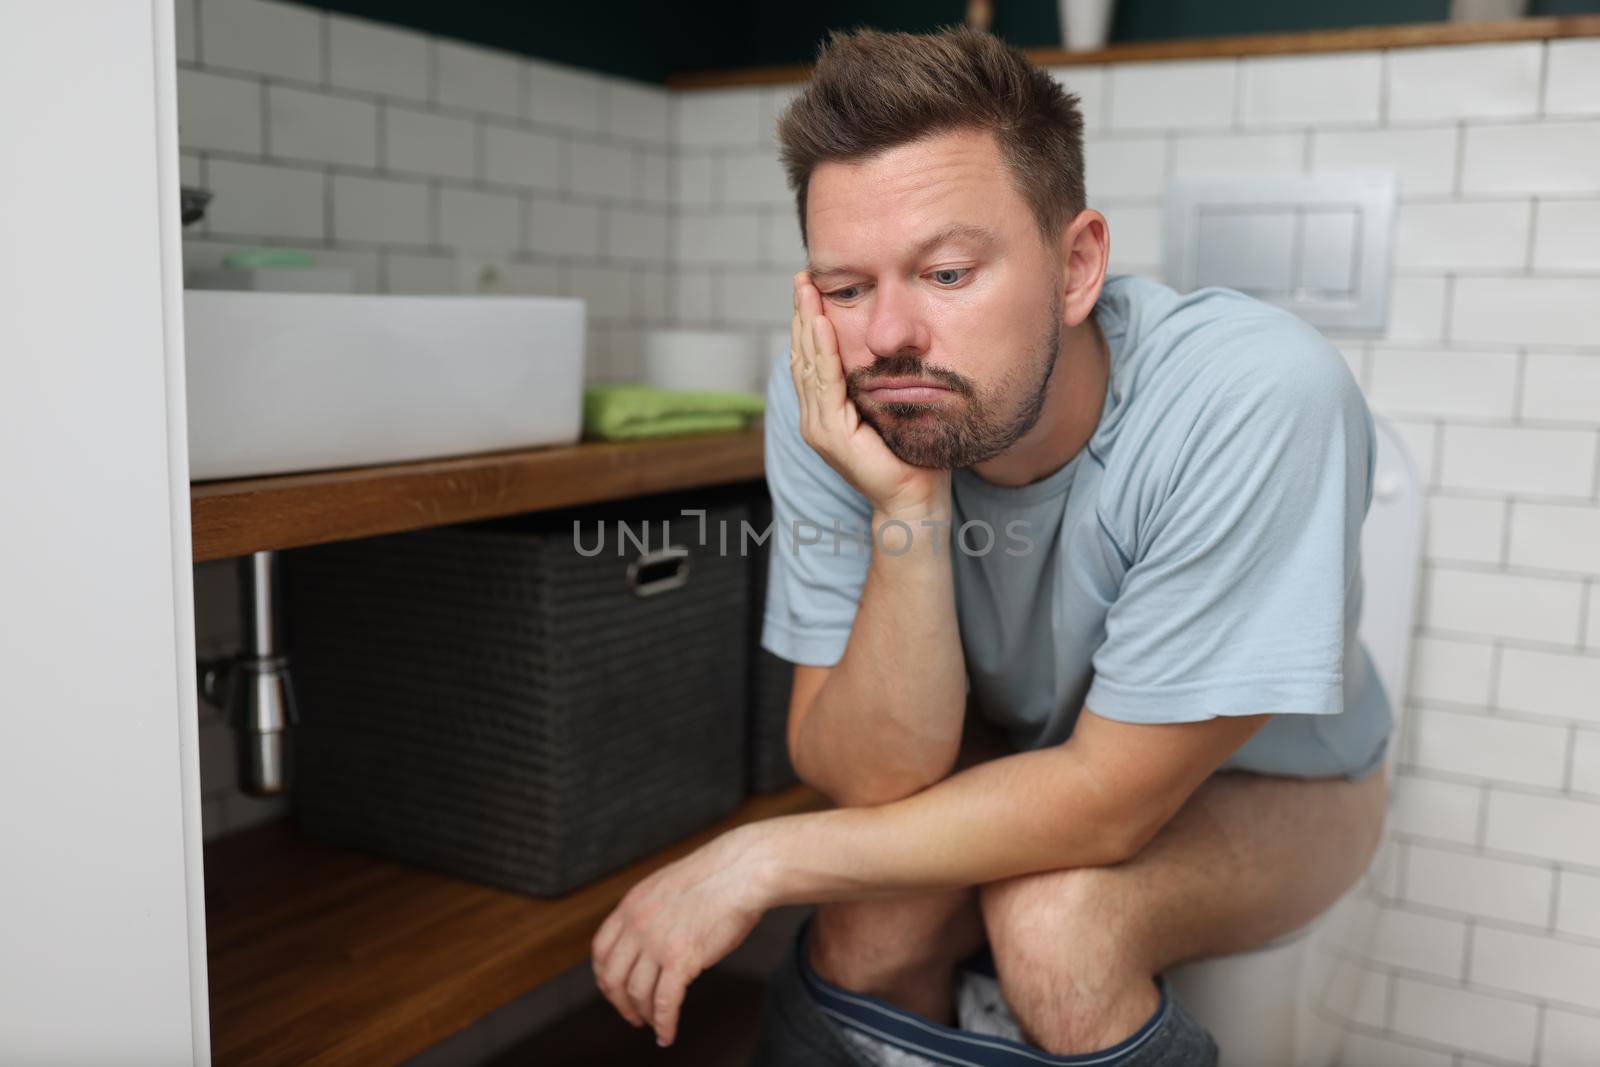 Portrait of bored man on toilet seat dream about something, fulfill natural need, male in bathroom with modern interior. Wc, hygiene, nature calls concept